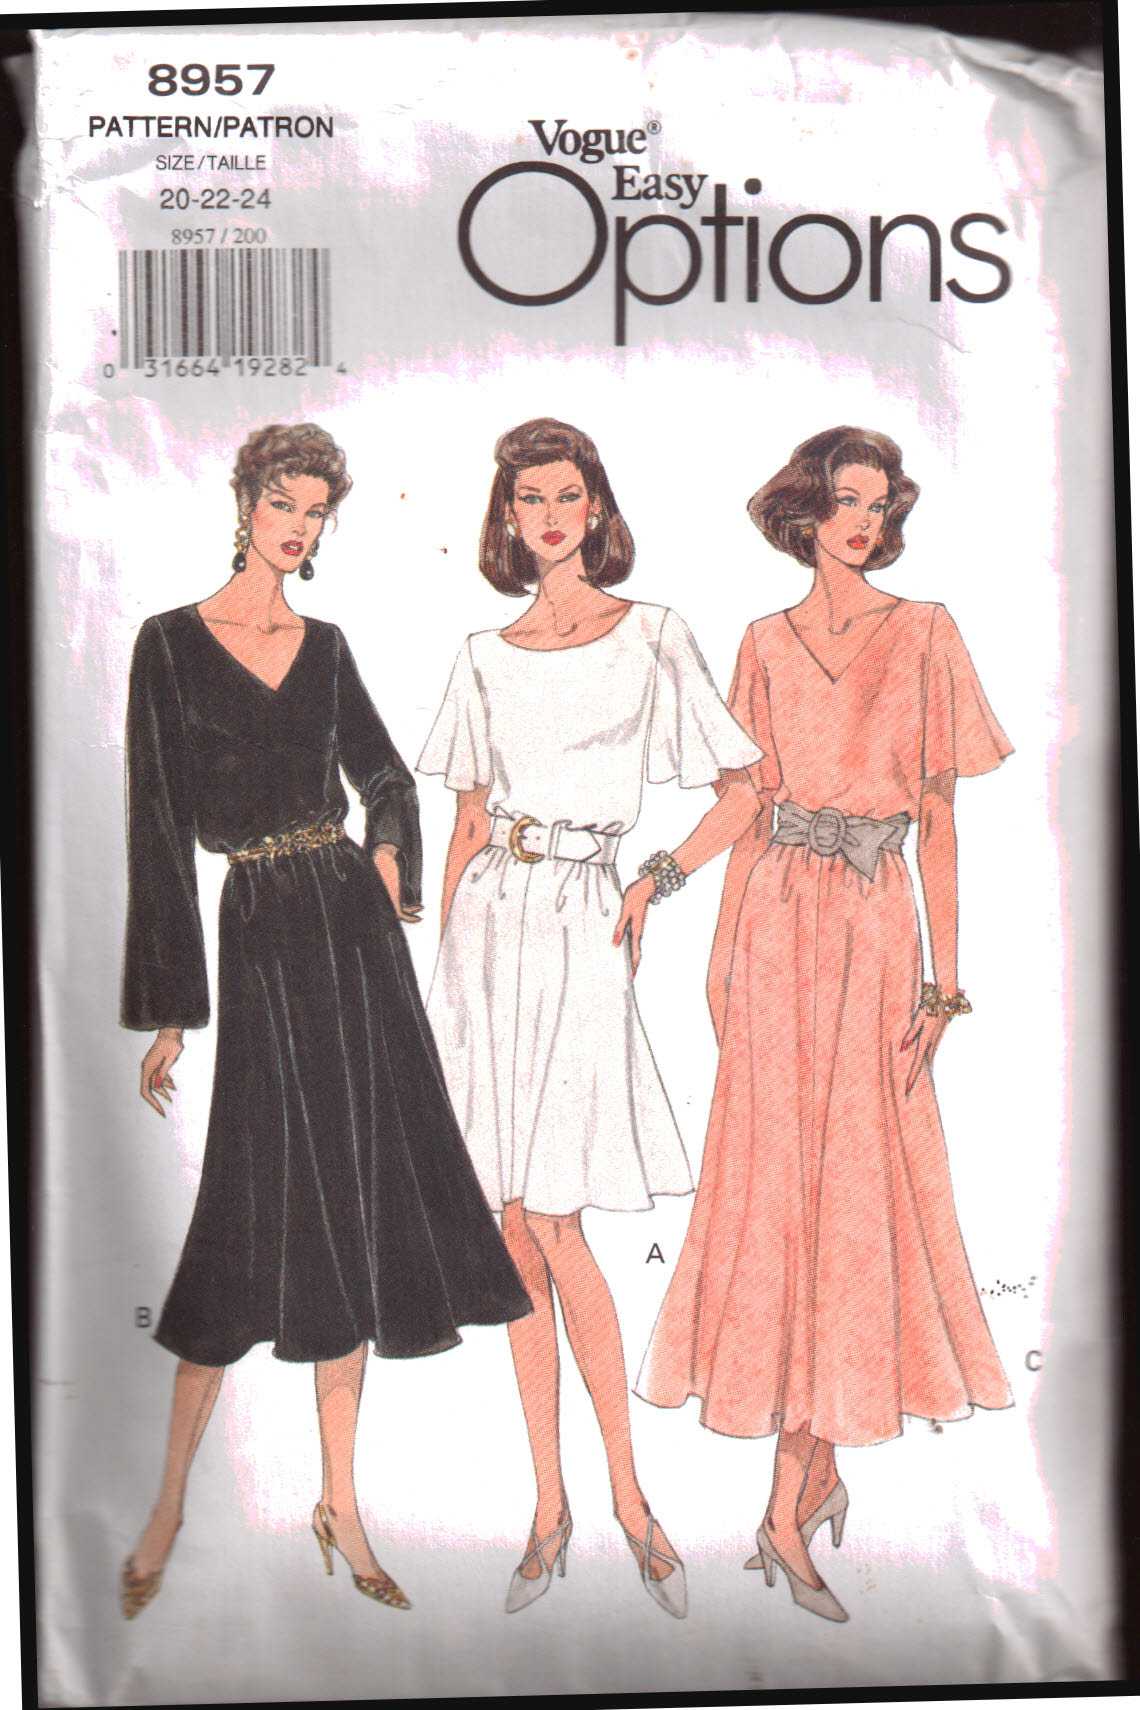 Vogue 8957 Dress Size: 20-22-24 Used Sewing Pattern